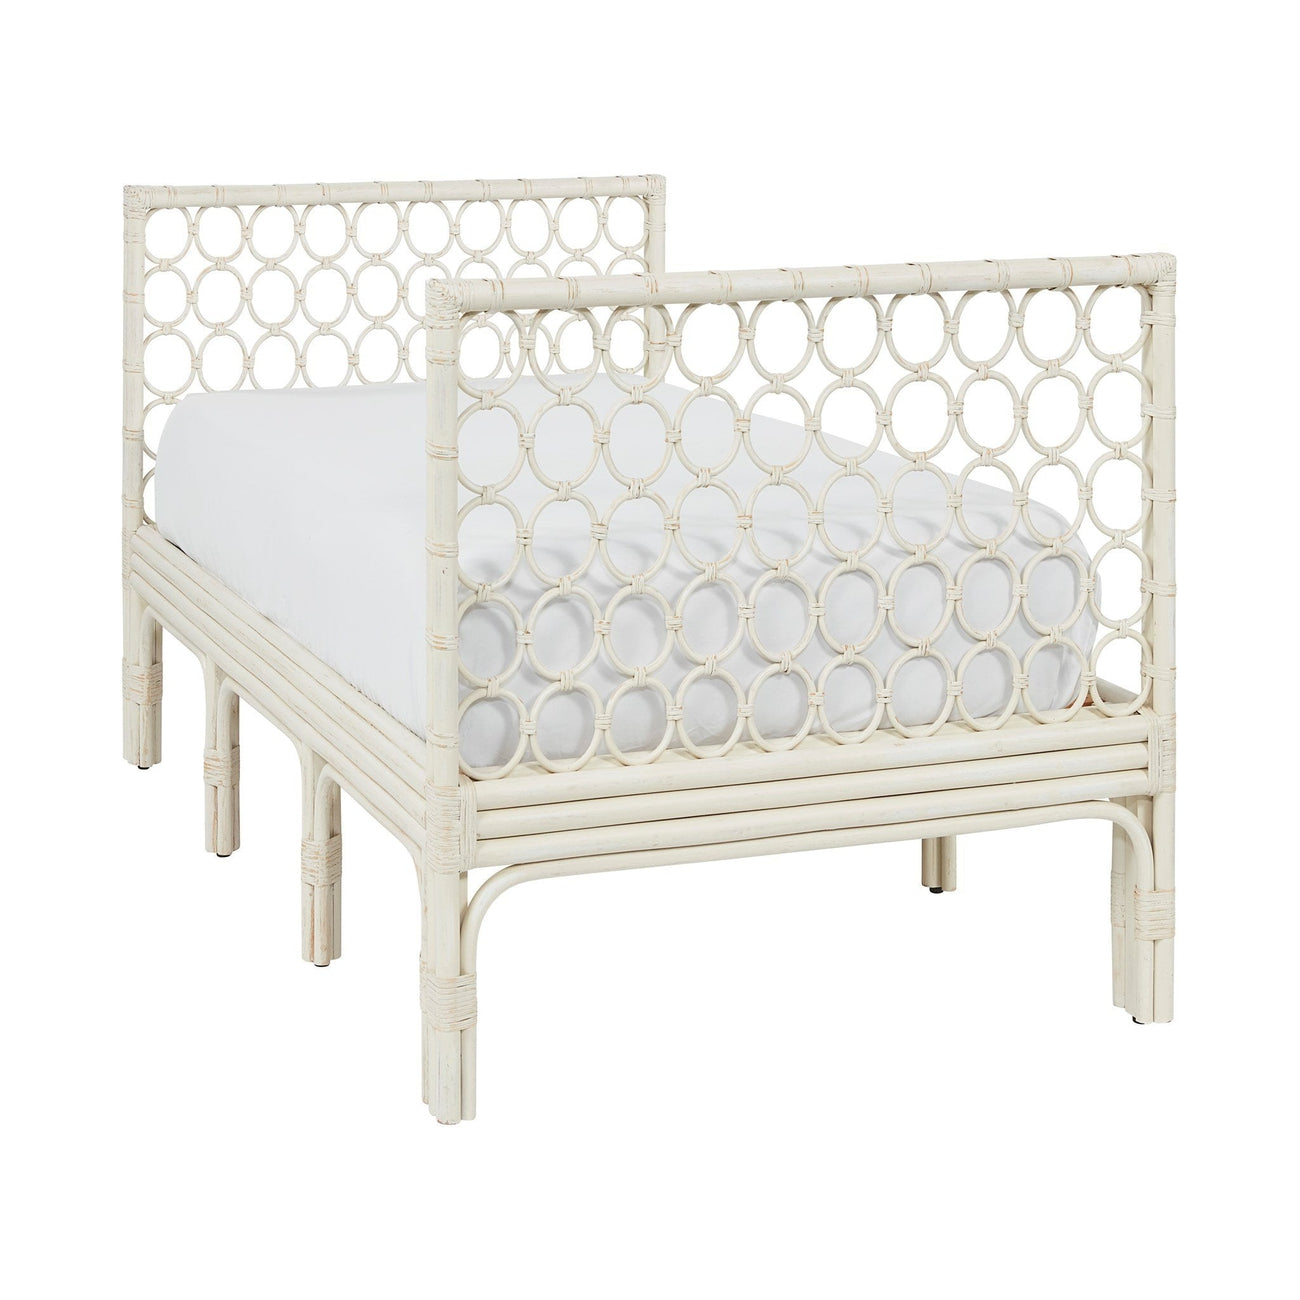 Getaway Seychelles Day Bed-Universal Furniture-UNIV-U033D200B-Daybeds-1-France and Son